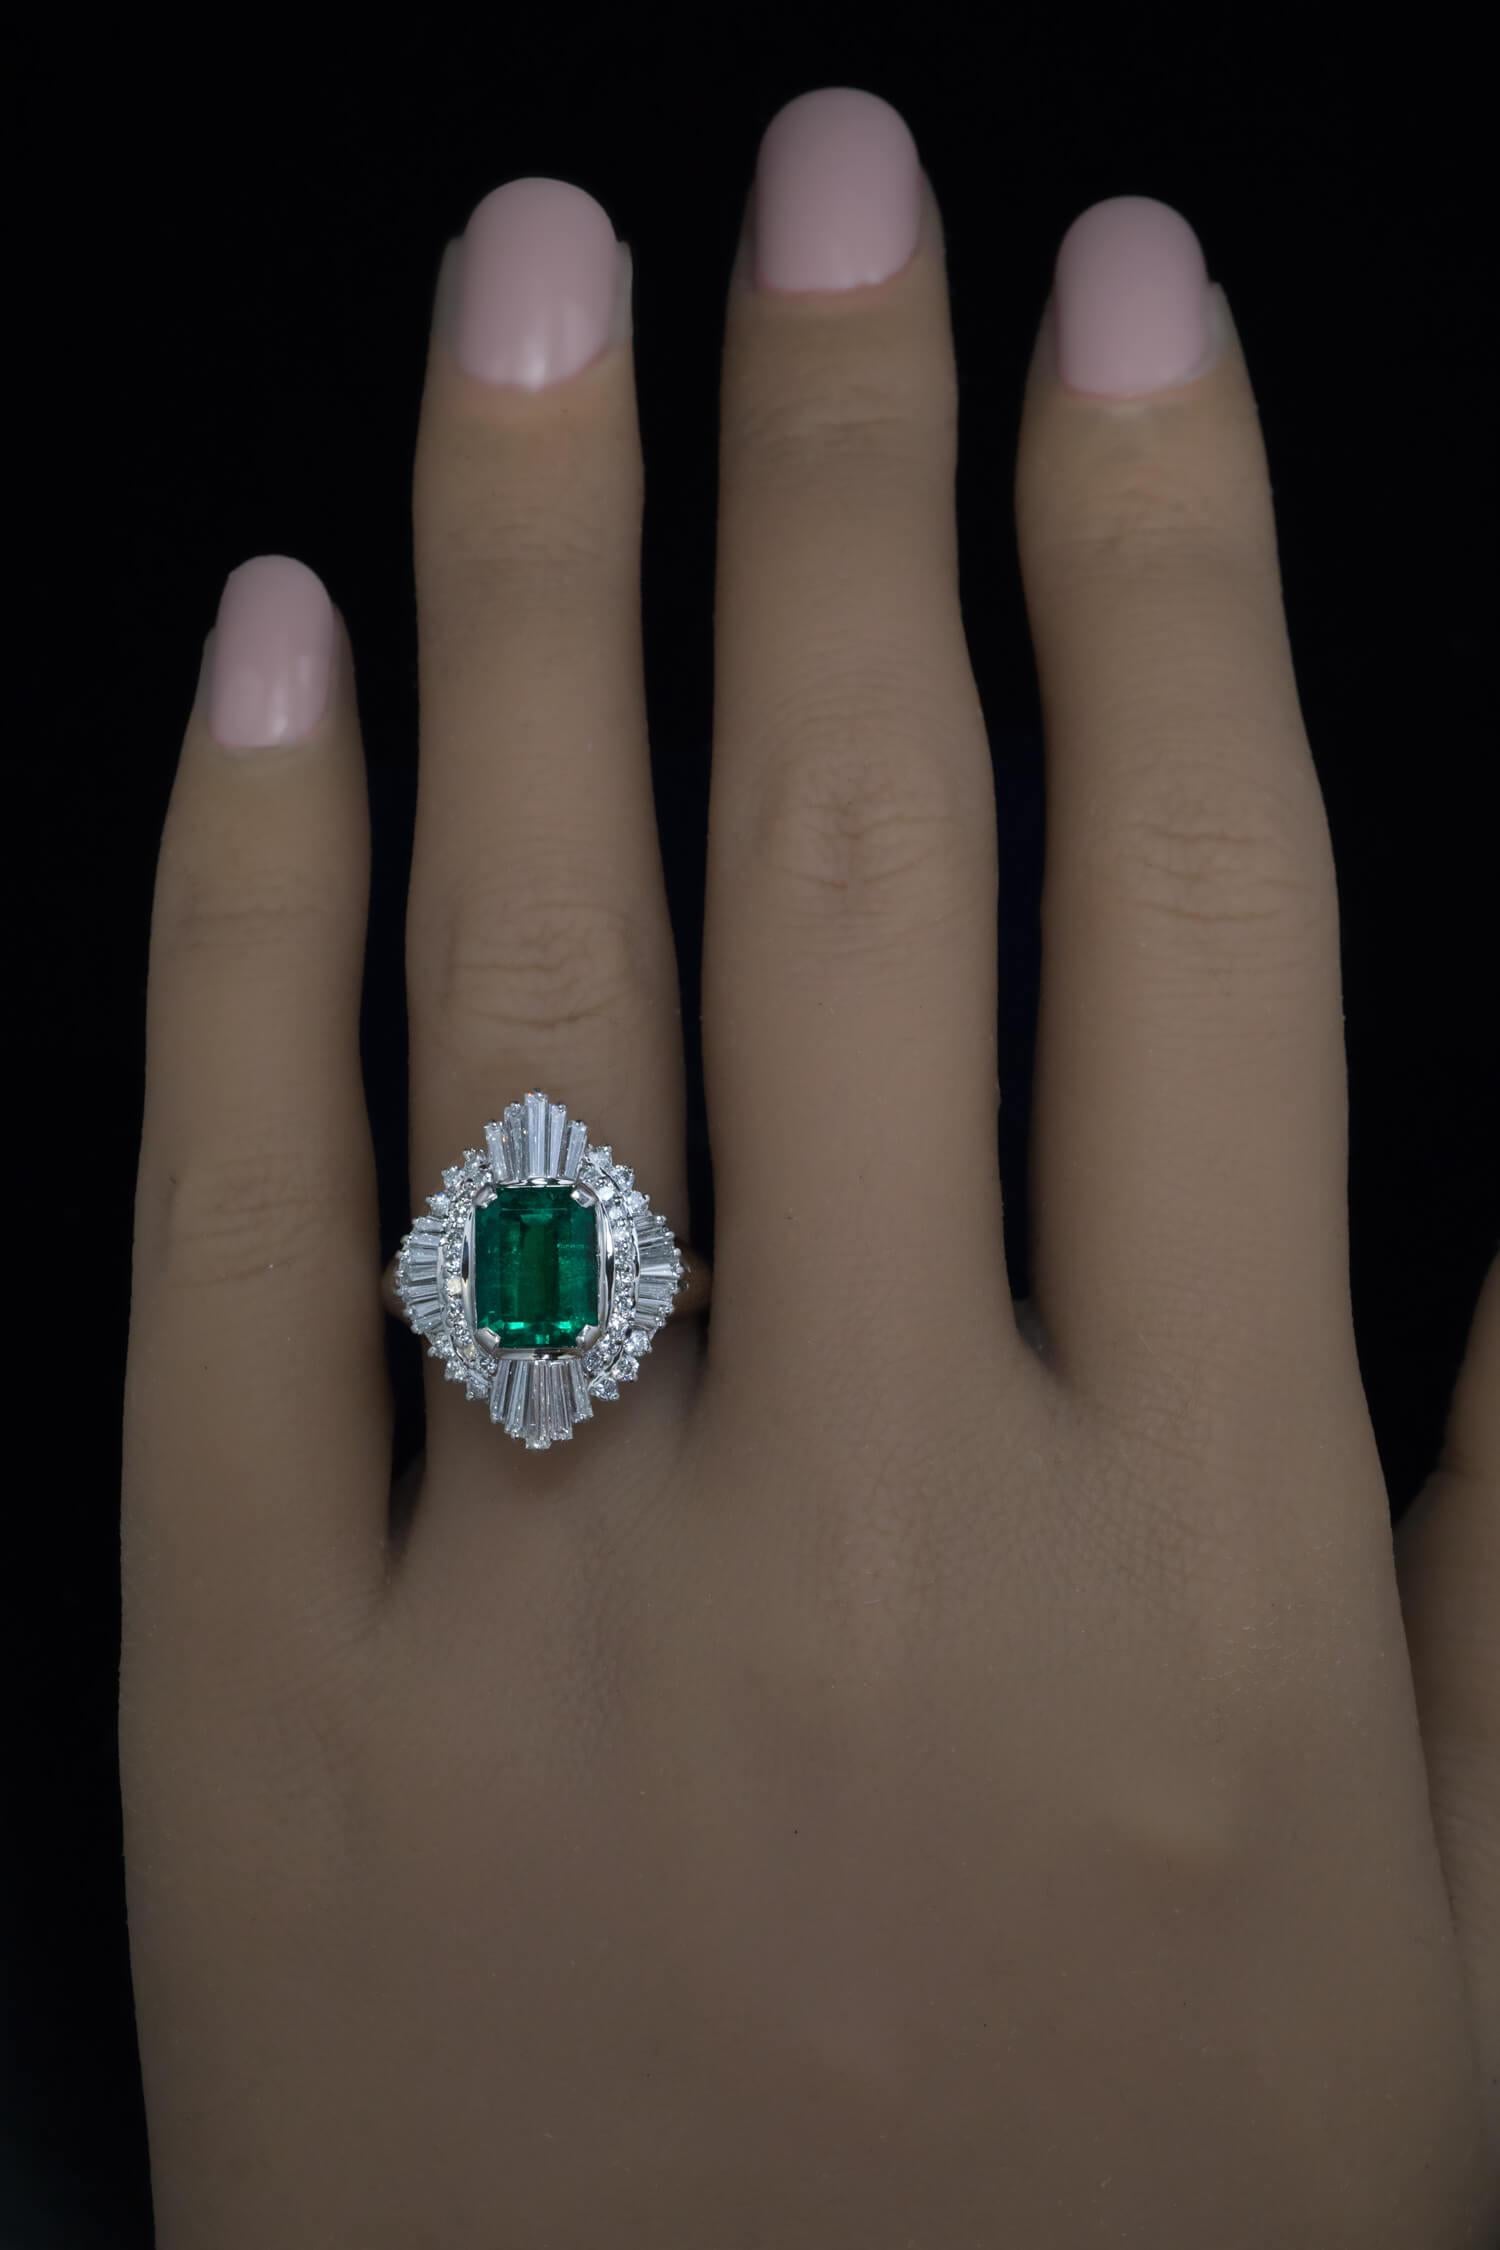 This well made ballerina style vintage platinum ring features a superb 2.01 ct Colombian emerald framed by tapered baguette and brilliant cut round diamonds. The emerald is very clean, of vivid bluish green color and rich color saturation. 